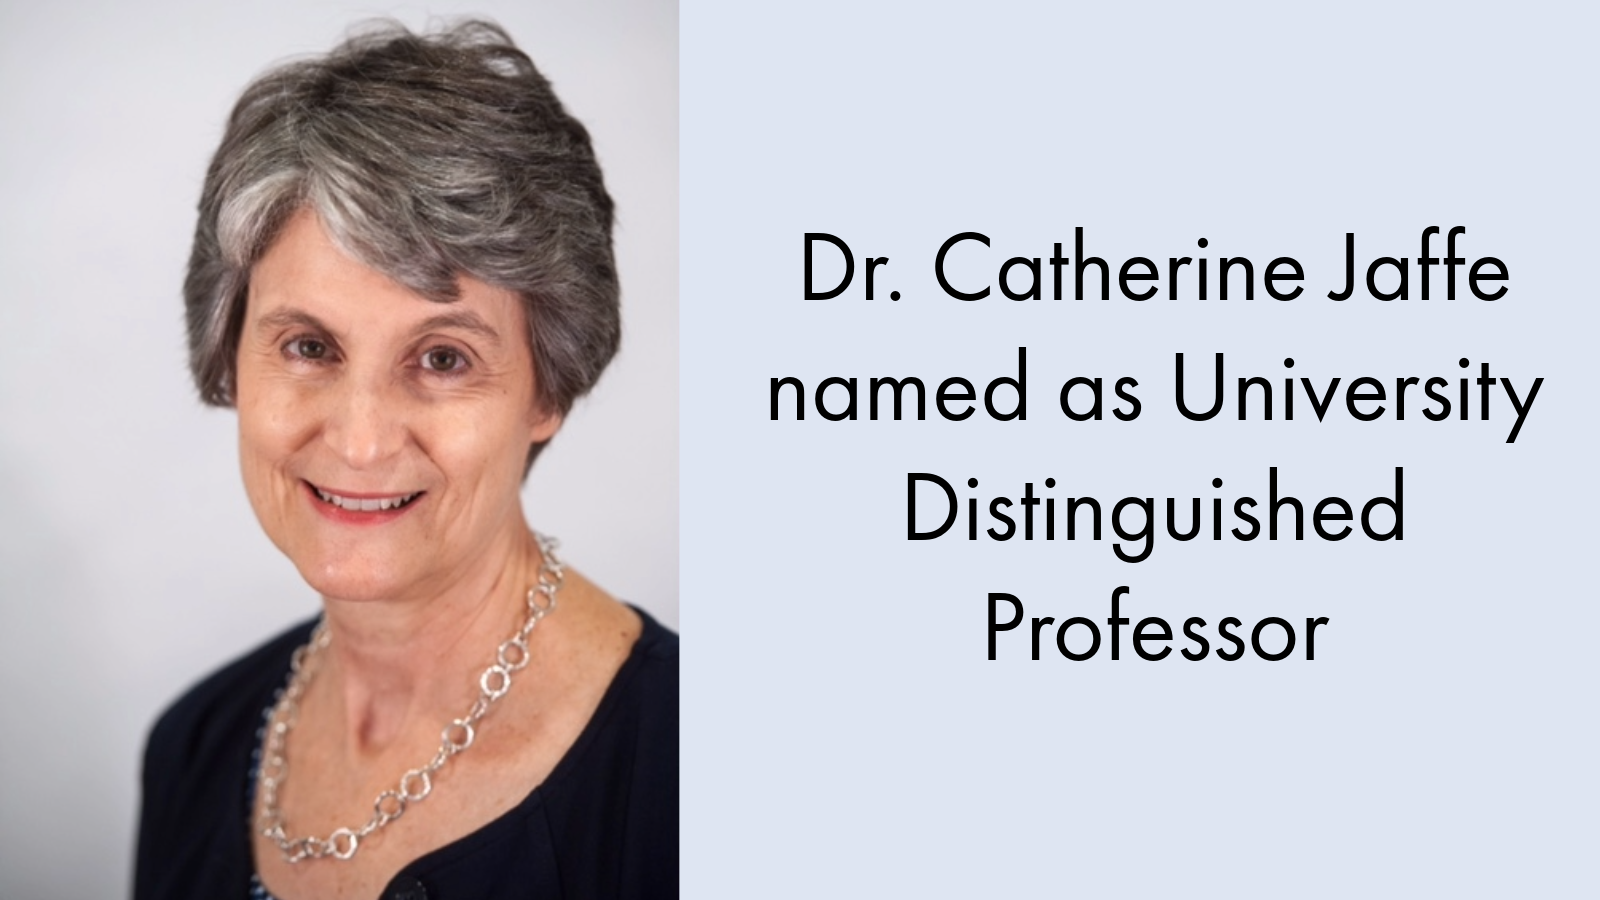 image: woman wearing necklace in front of grey background; text: Dr. Catherine Jaffe named as University Distinguished Professor